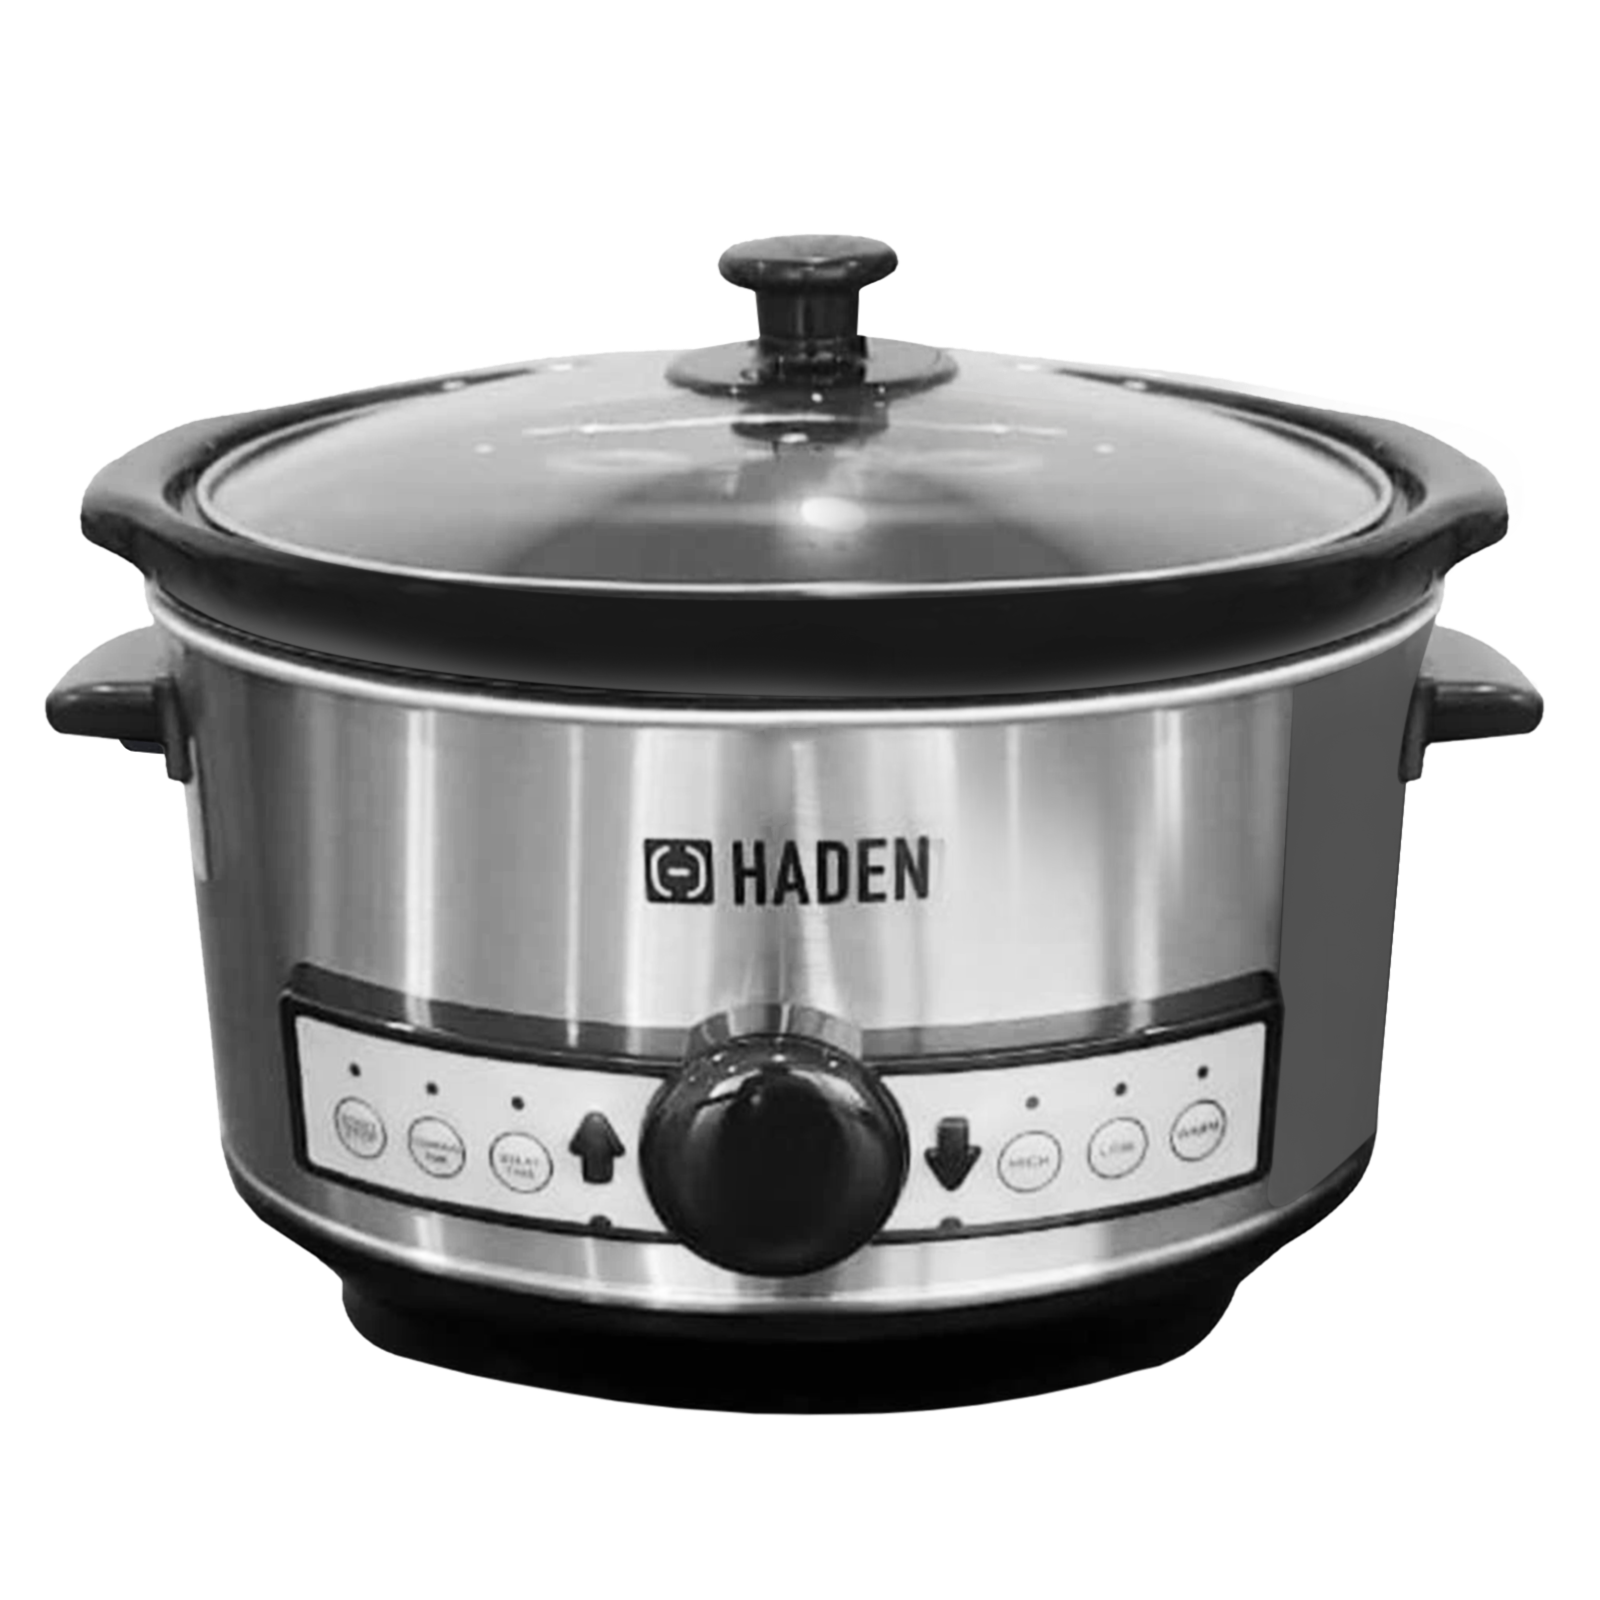 Haden 3.5 Litres Digital Slow Cooker (With Timer, Silver)_1